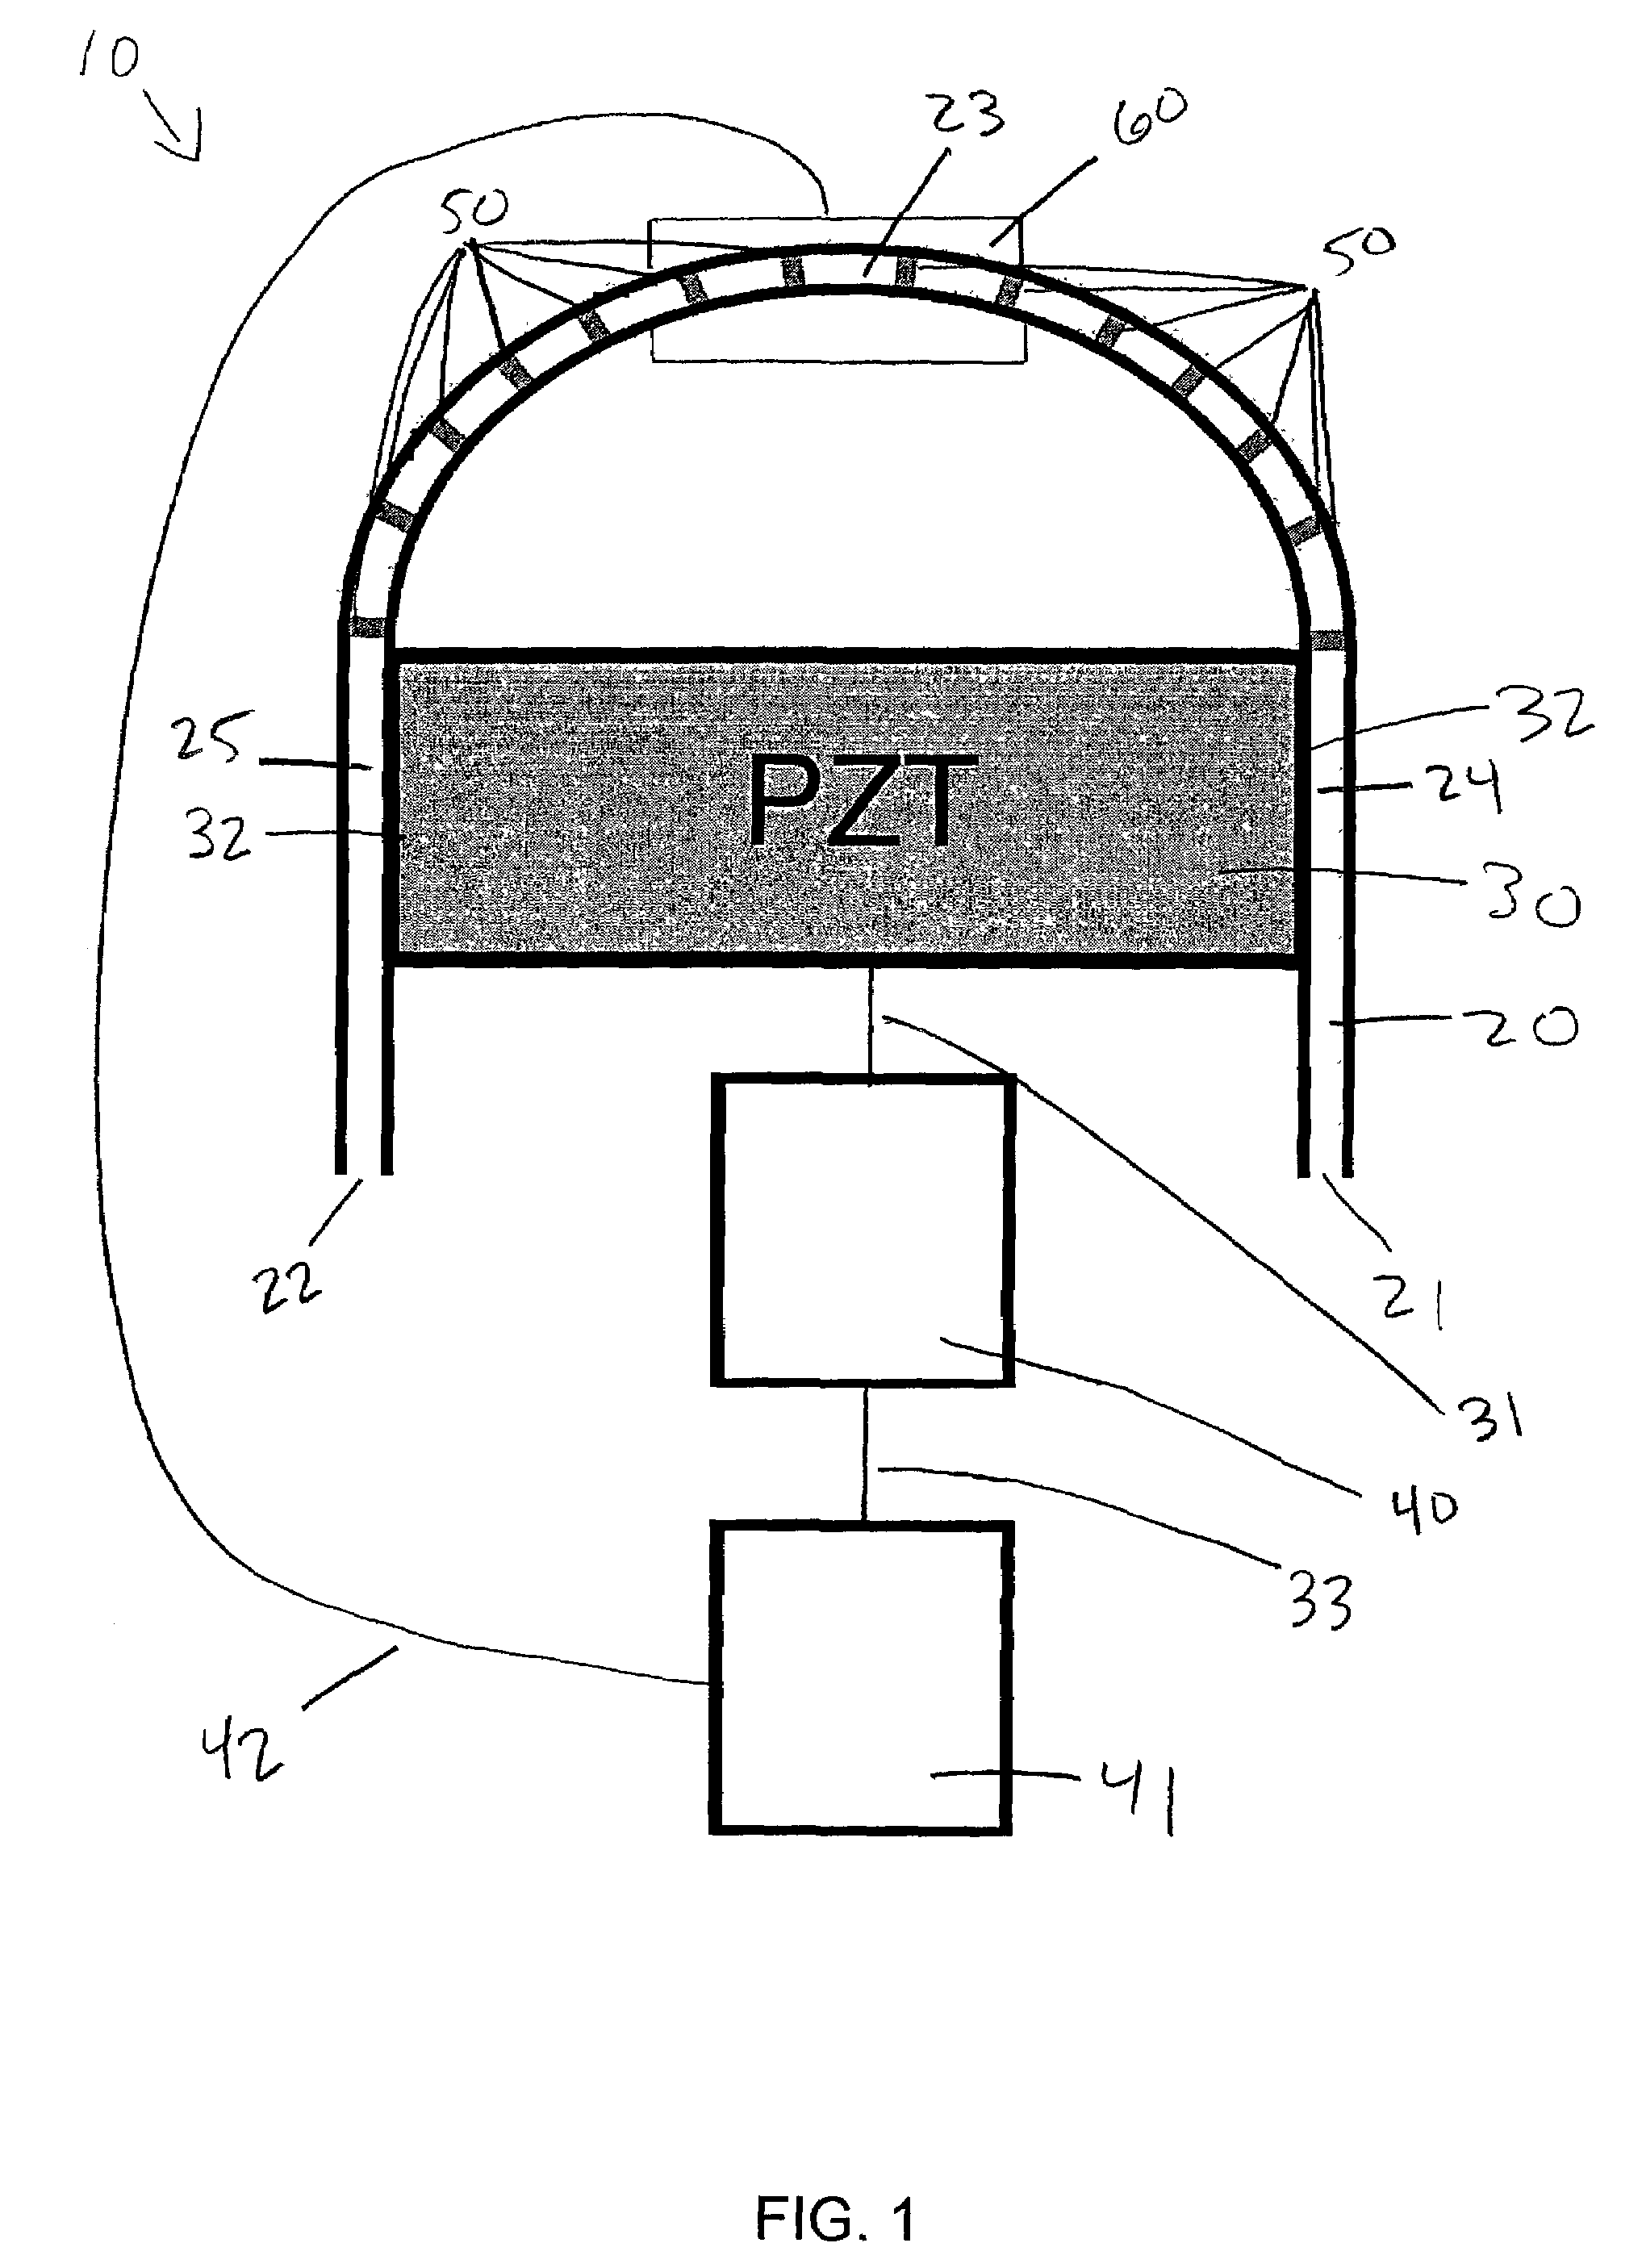 Method and apparatus for separating particles by size